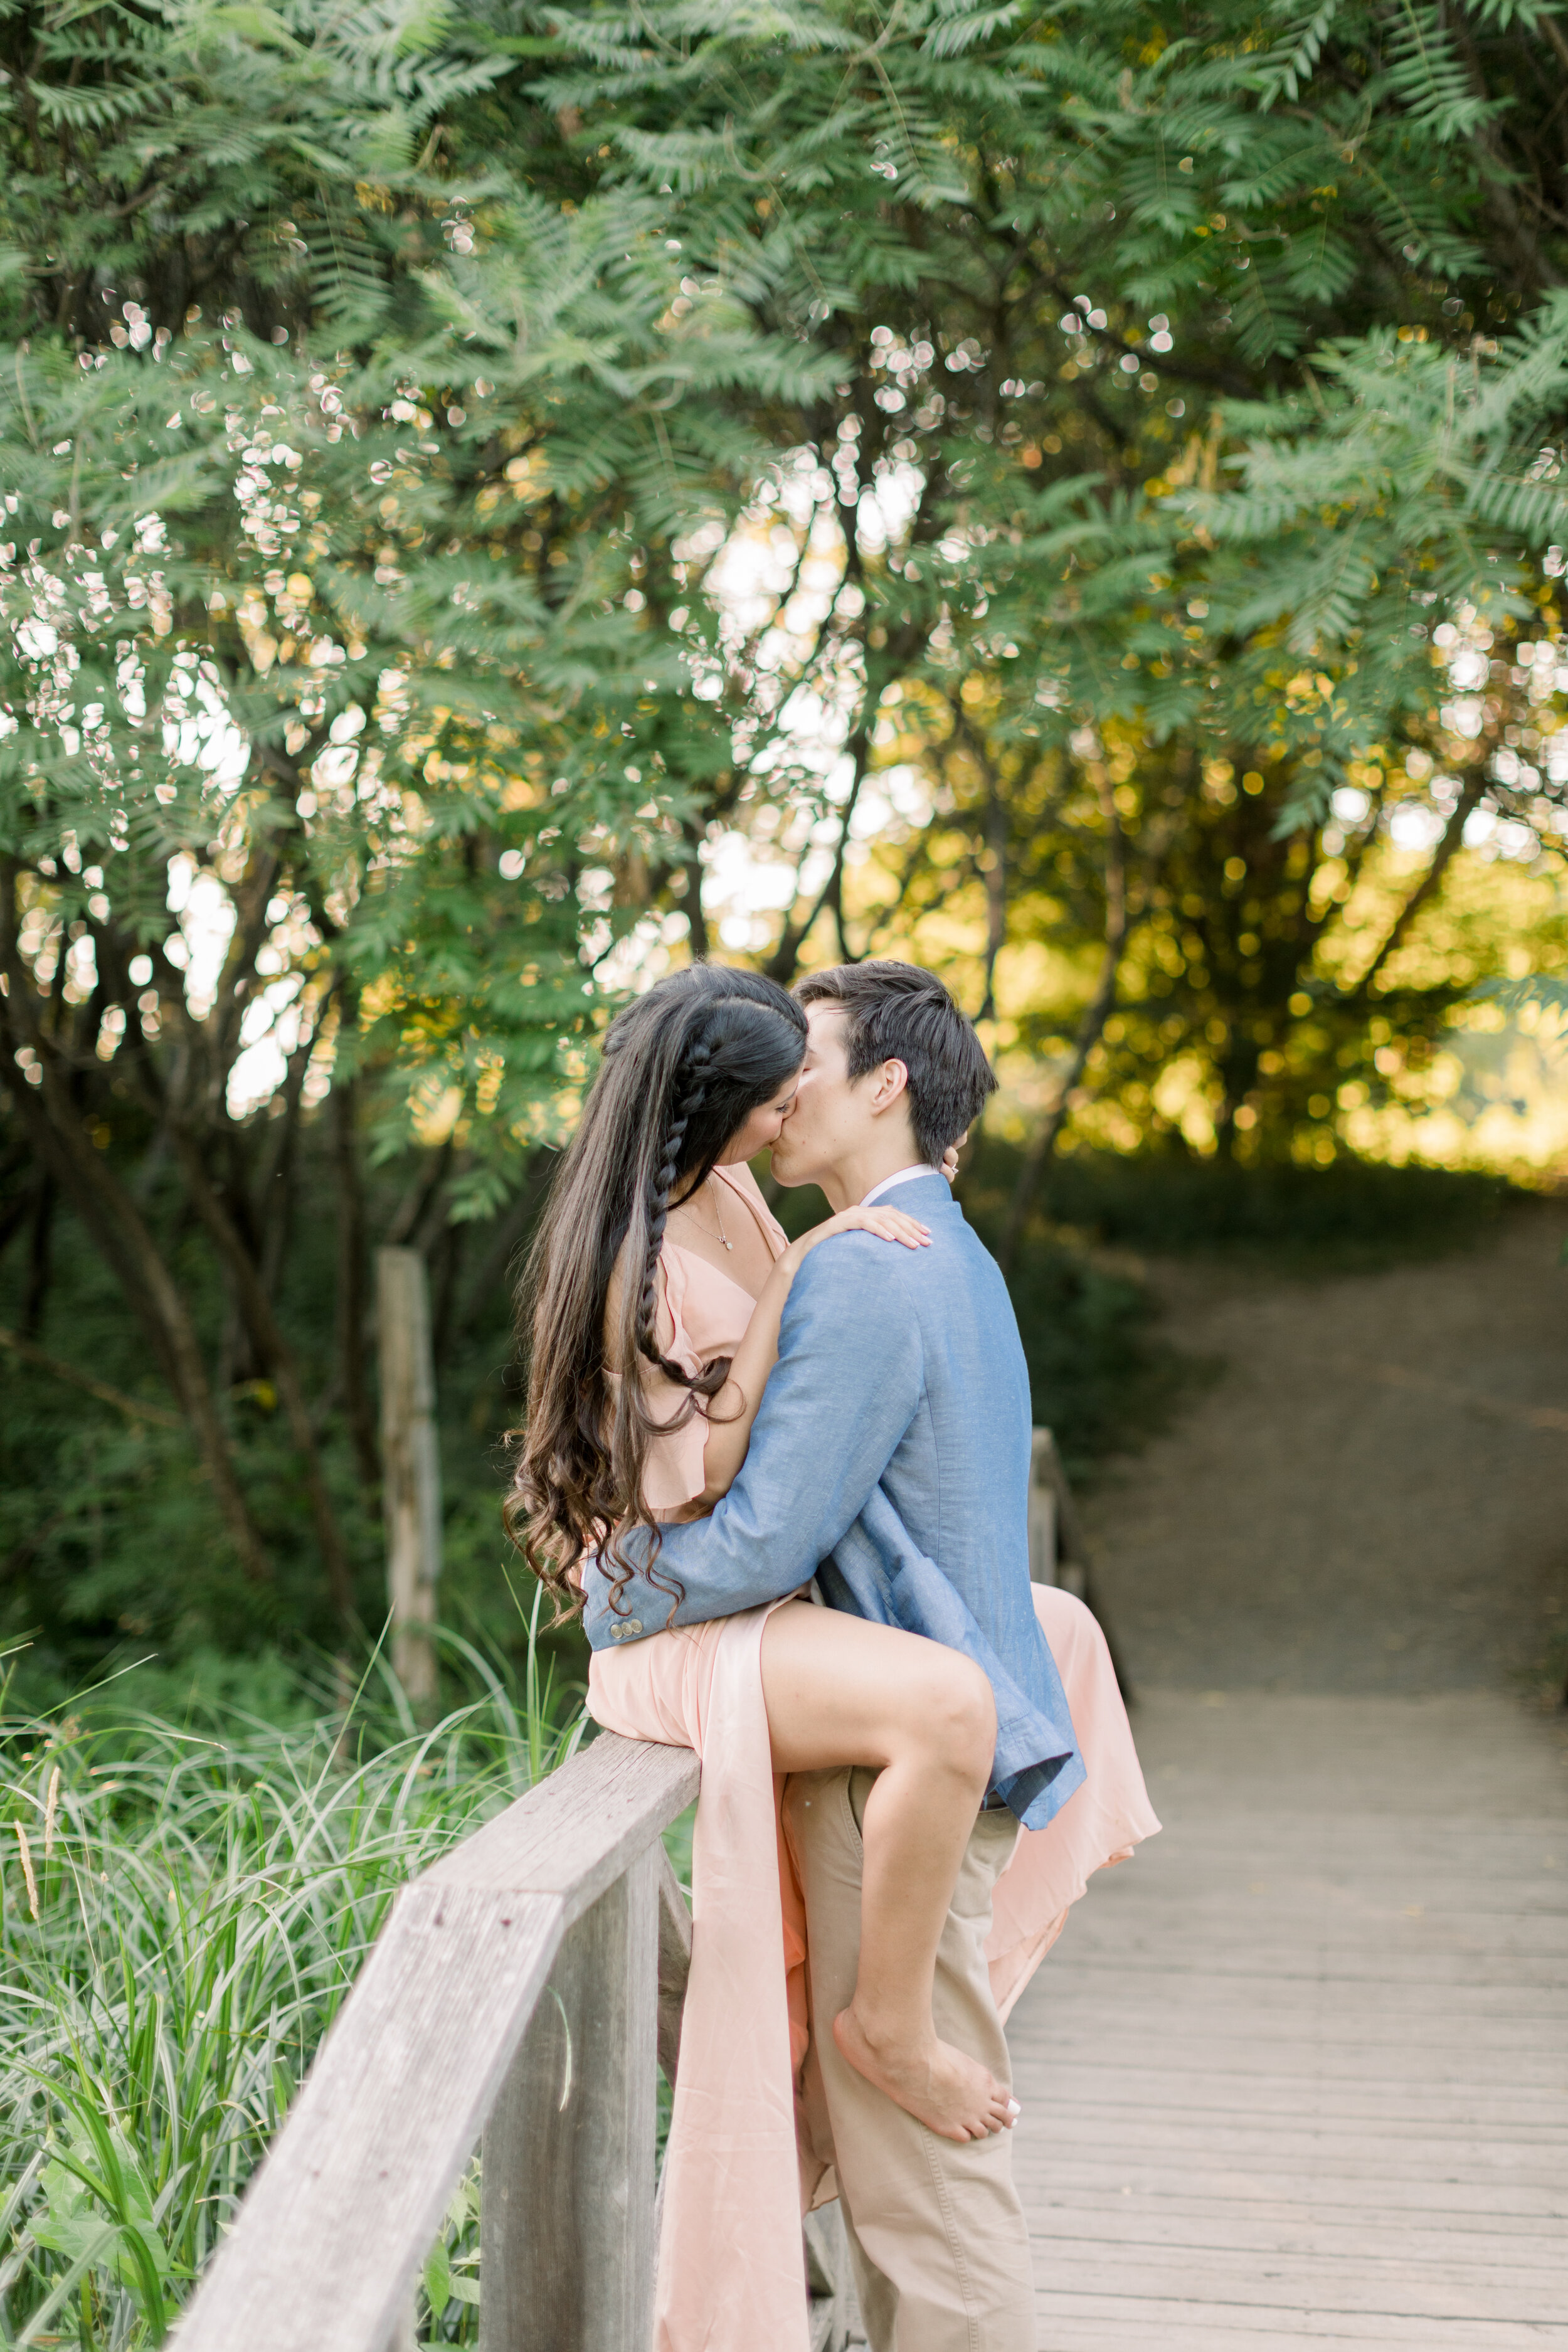  Couple kissing intimately on a bridge in this ideal outdoor photoshoot location in Ottawa, ON by Chelsea Mason Photography. how to style couples for engagements intimate poses for couples poses for couples photoshoots for couples engagement poses id